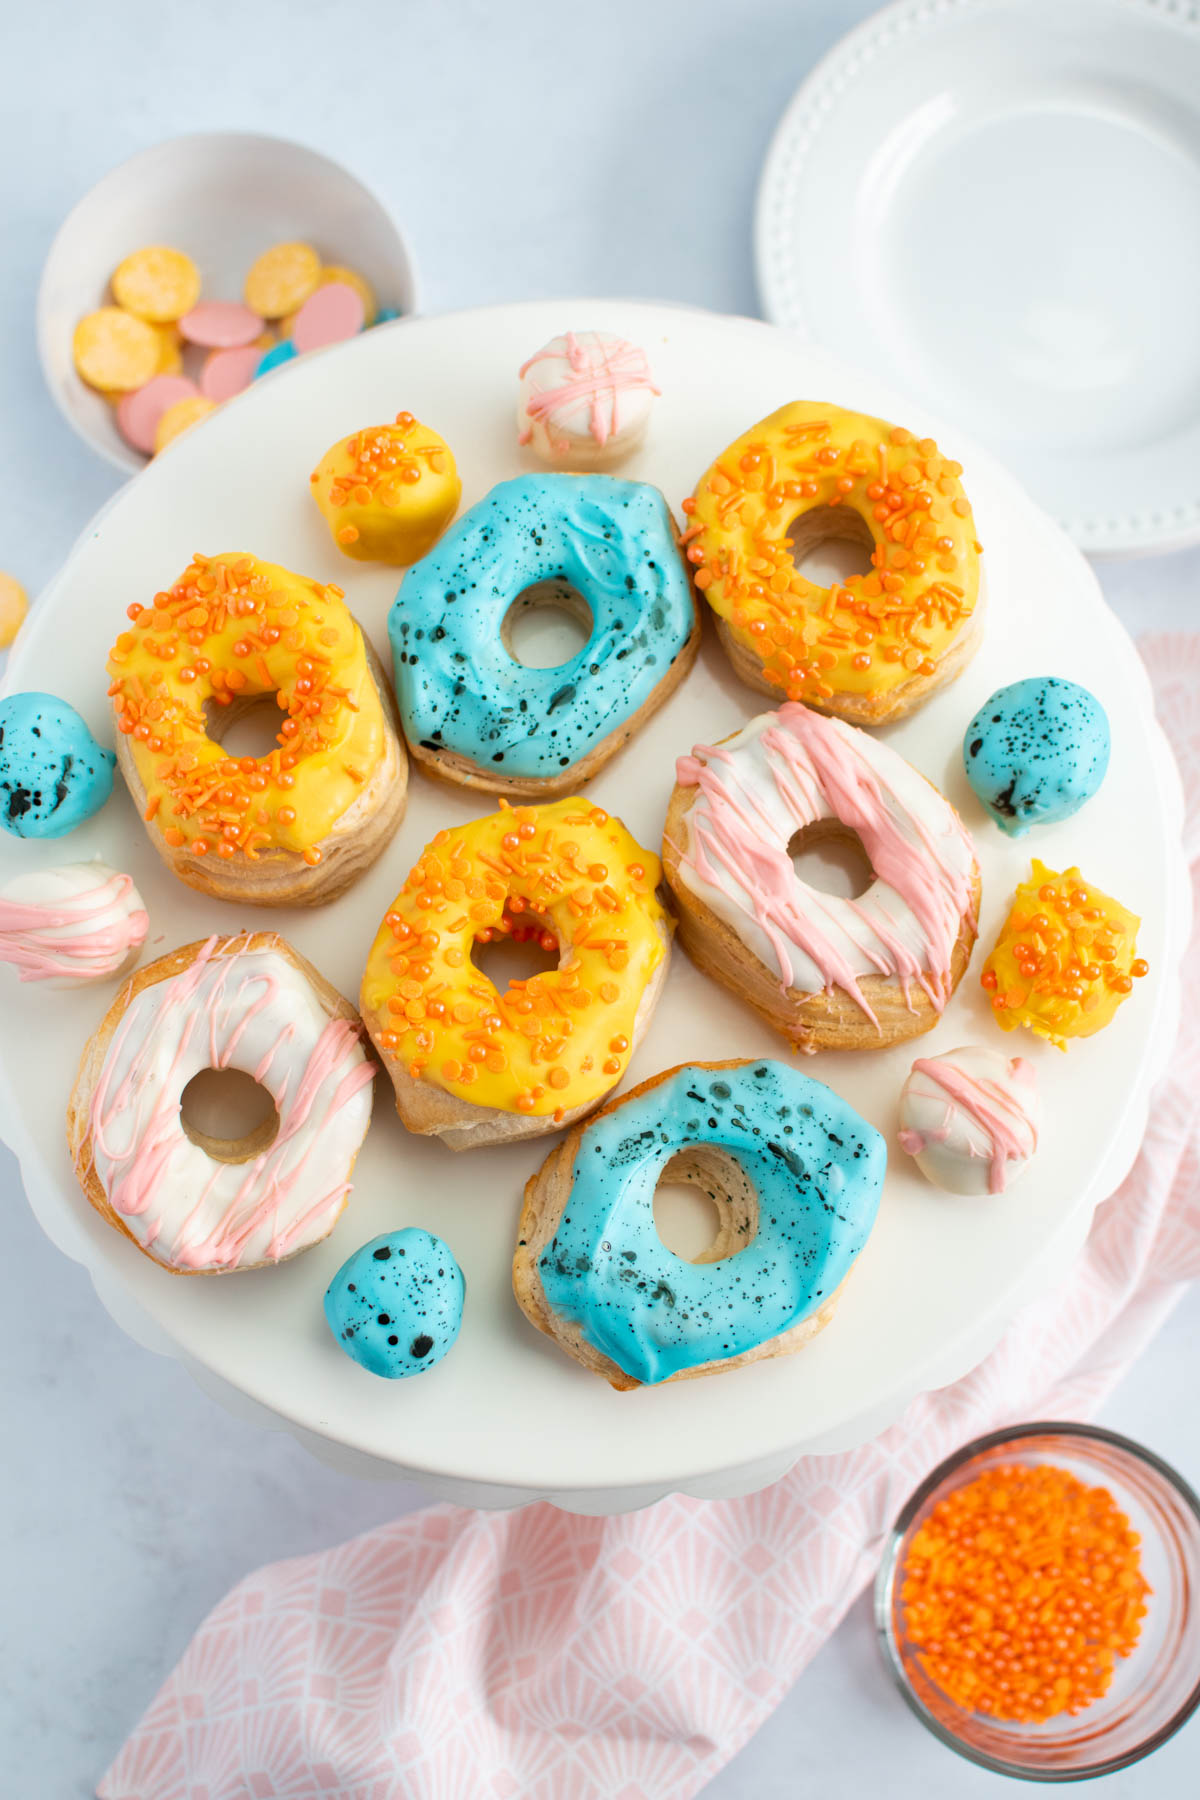 Easter decorated air fryer donuts on cake stand with plates and bowls of sprinkles nearby.